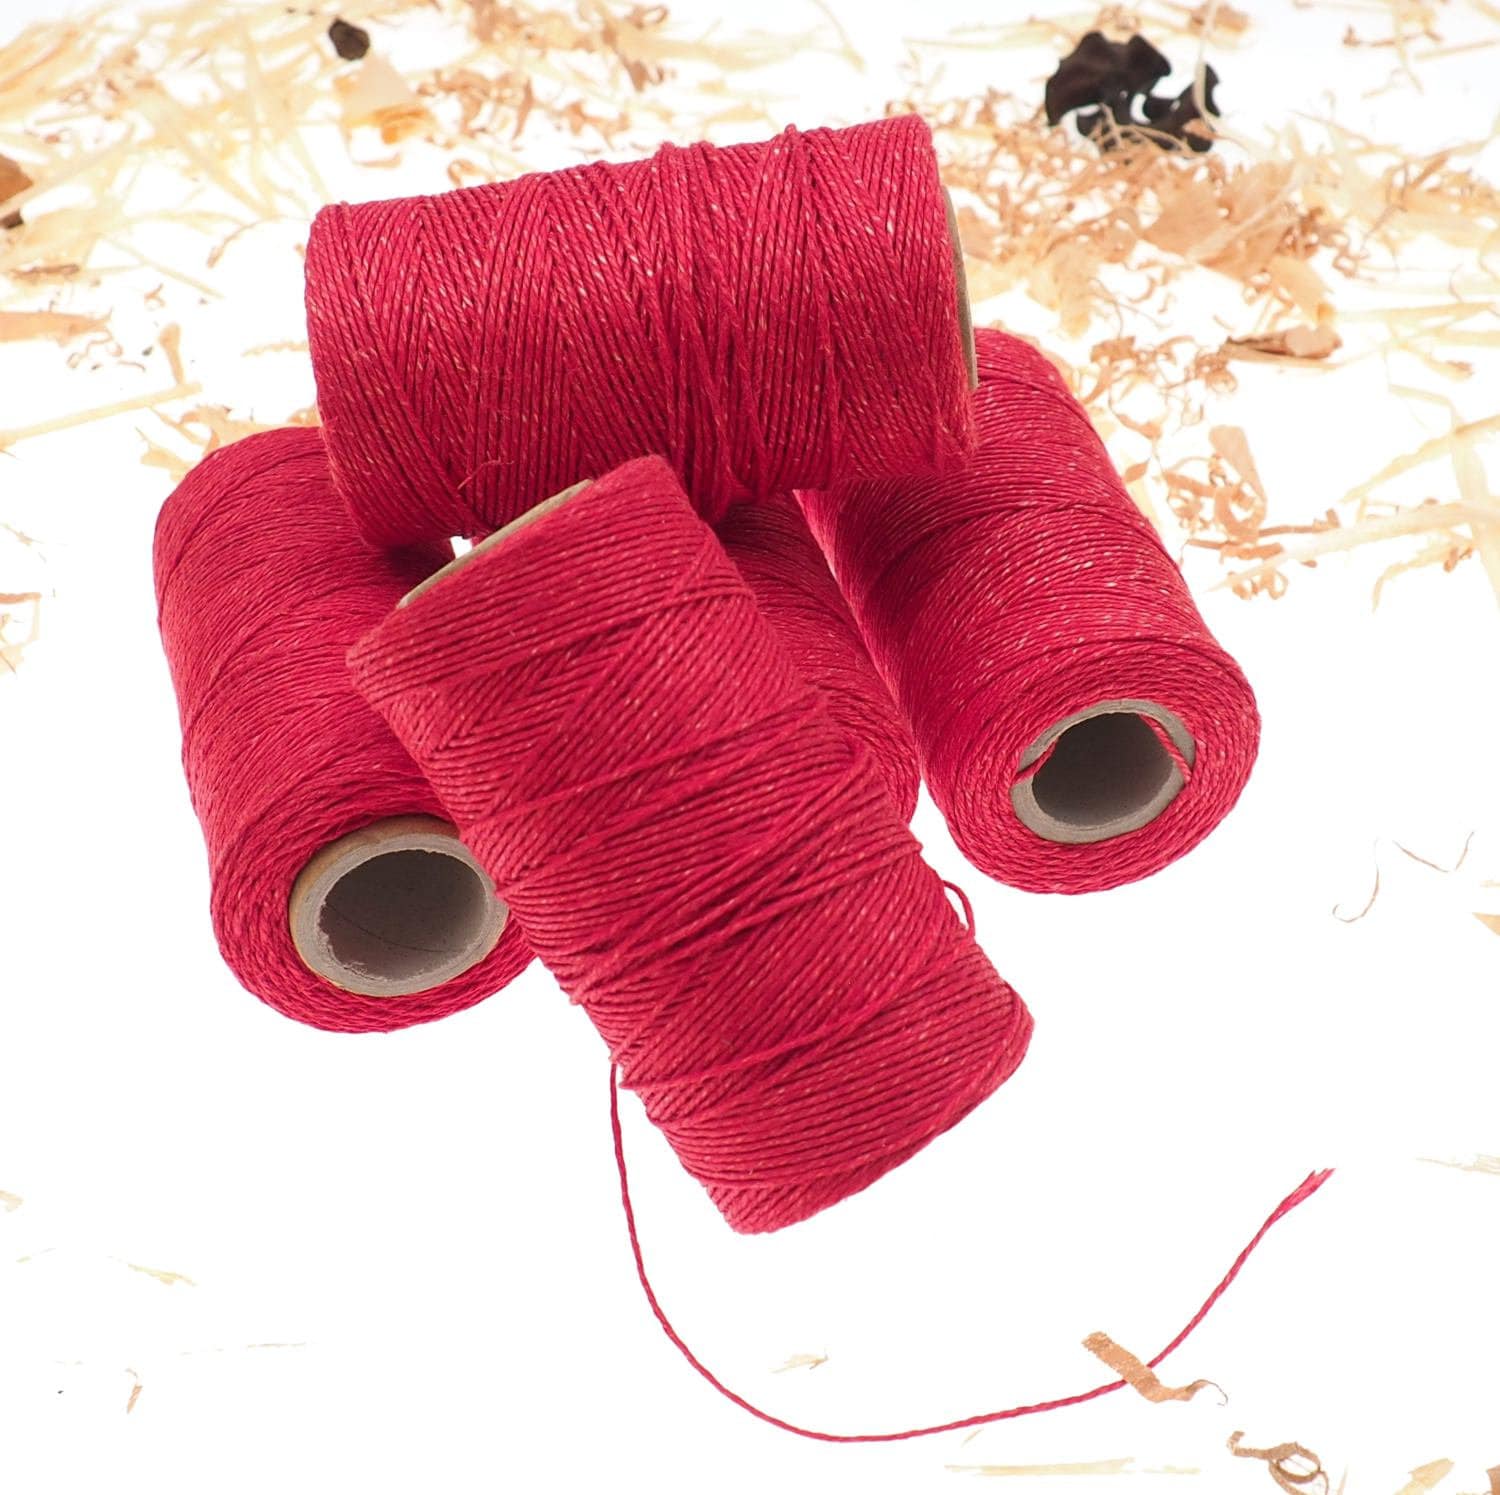 RED Linen Thread, Unwaxed Red Linen String , Warp Thread Thickness of 1mm /  3ply 100grams 210 Yards 190 Metres, Linen Sewing Thread 